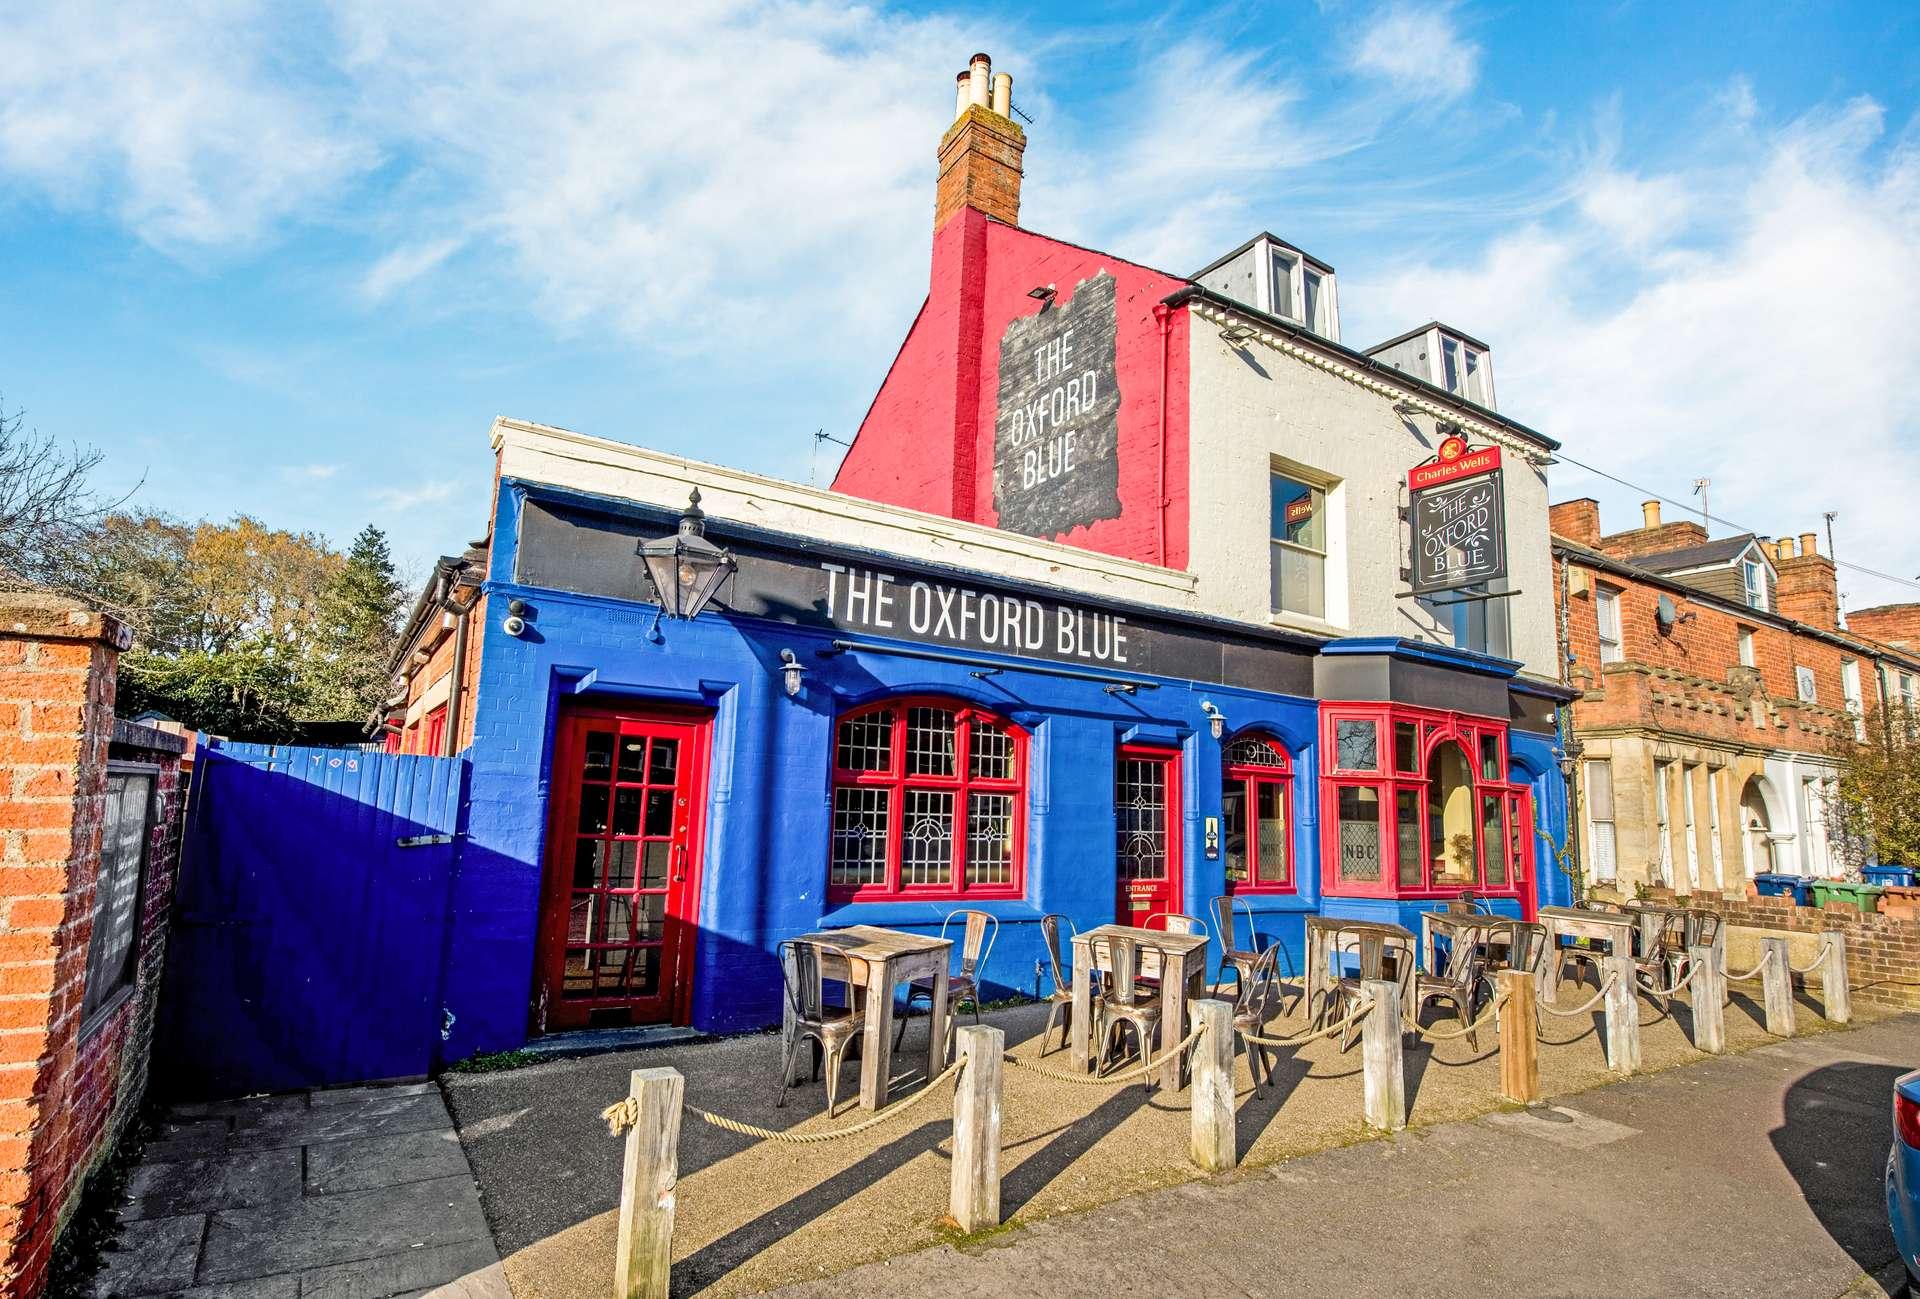 Oxford pub freehold on the market for £1.23m+